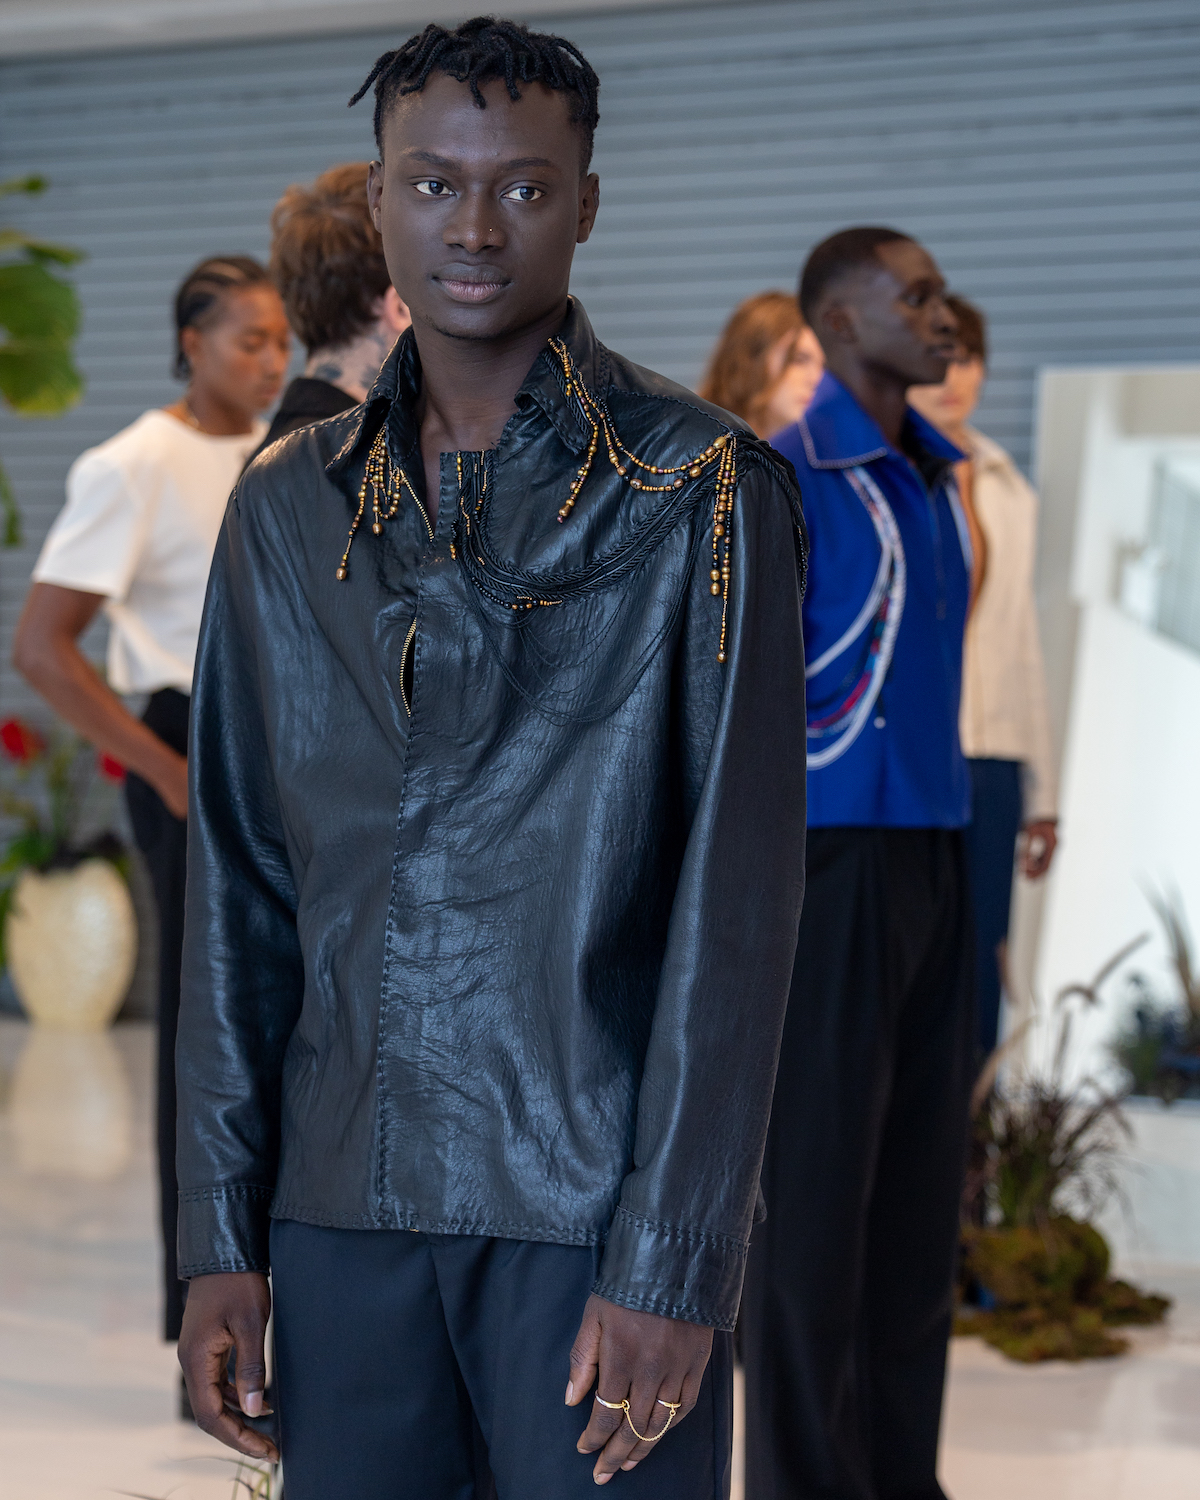 A model wearing a black outfit with gold hardware stands in the middle of the room. The model is wearing clothes from KENT ANTHONY.